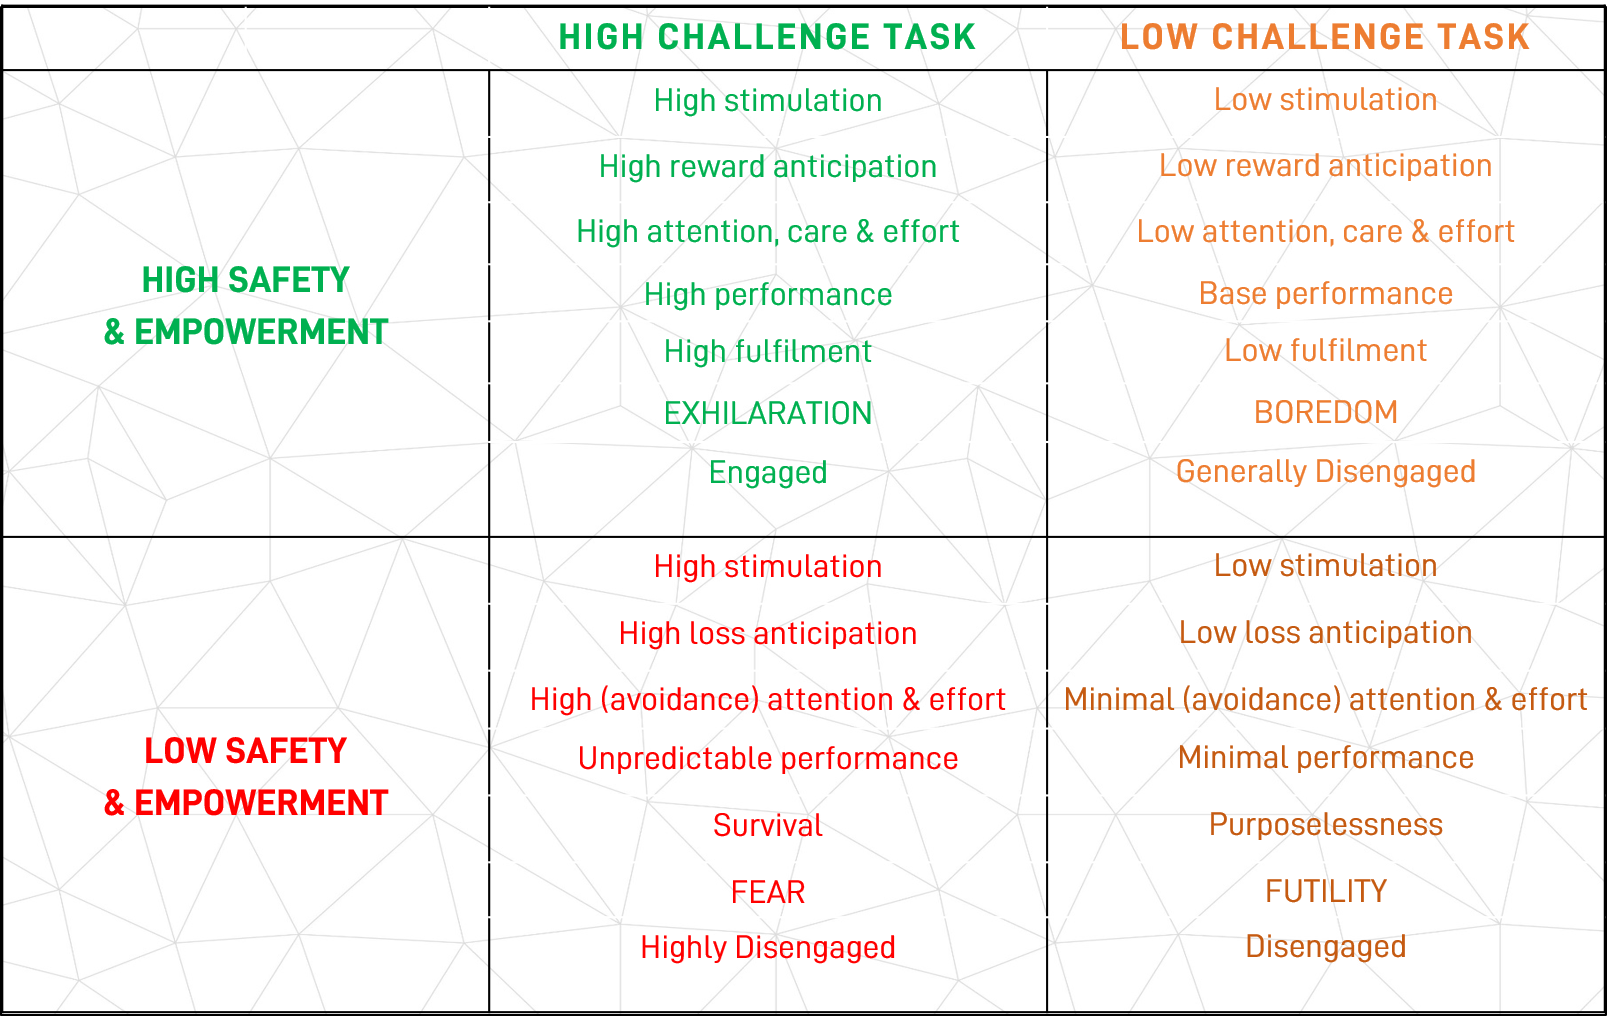 Graphic: How high or low levels of challenge can relate to feelings of safety and empowerment